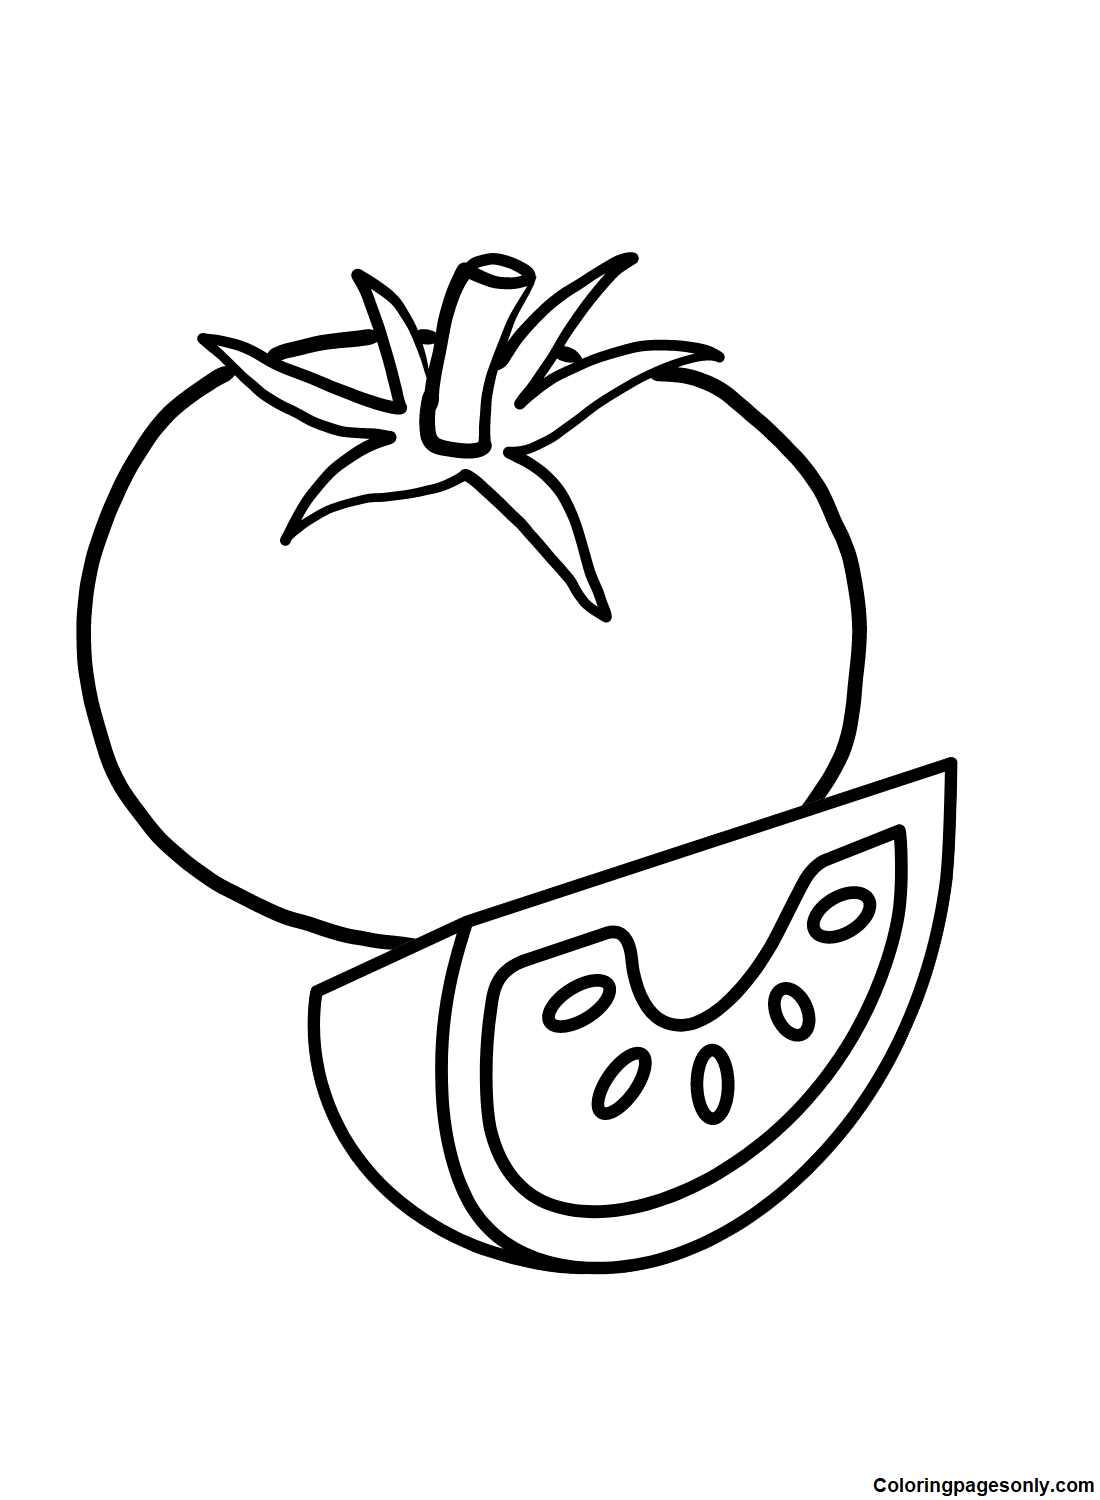 A Tomato and Quarter Tomato Coloring Pages